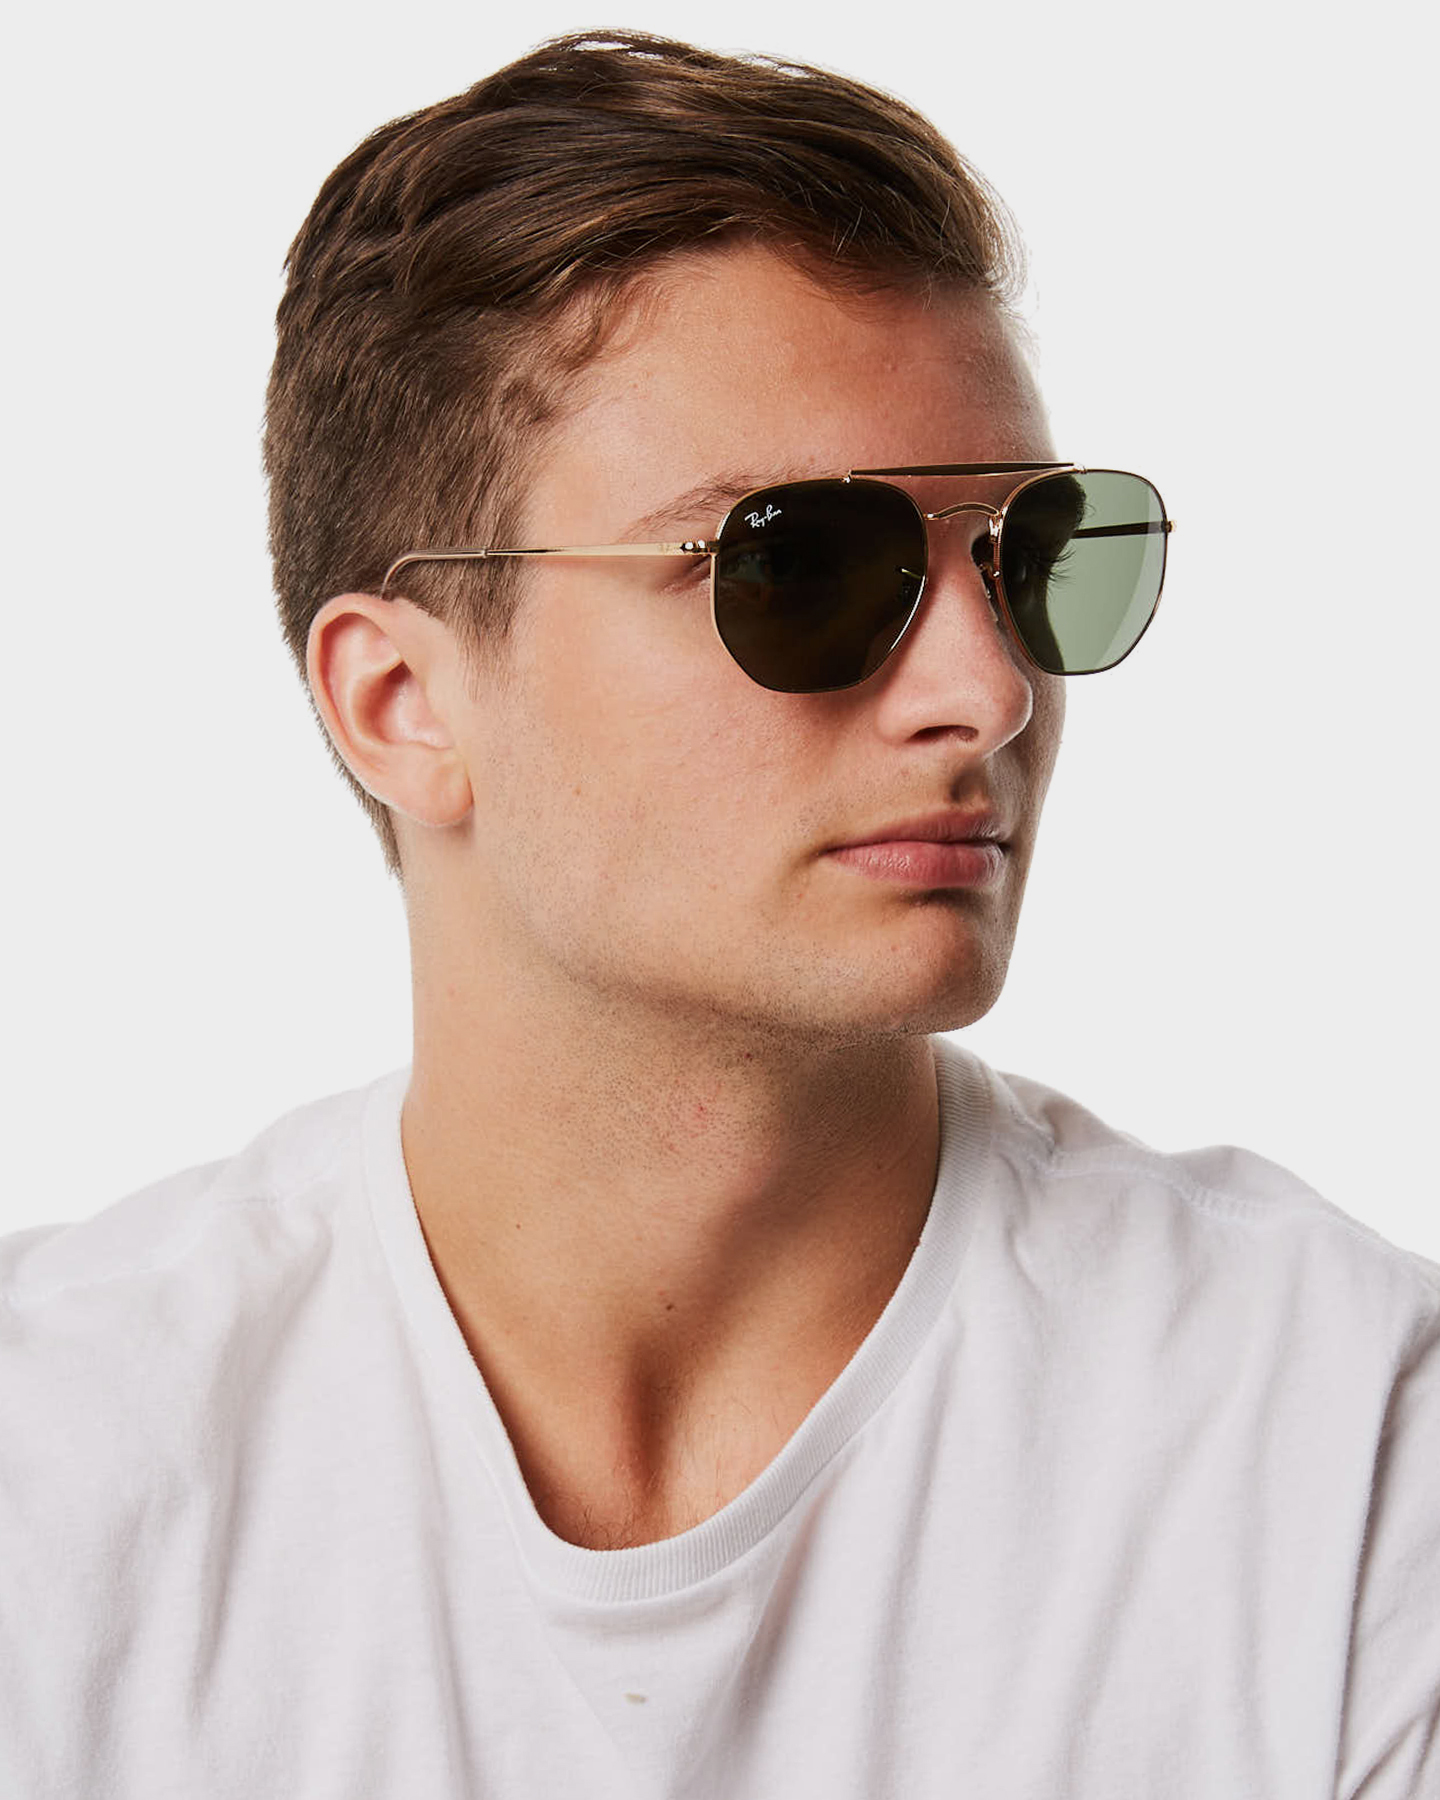 Ray-Ban Marshal Sunglasses - Gold Green | SurfStitch